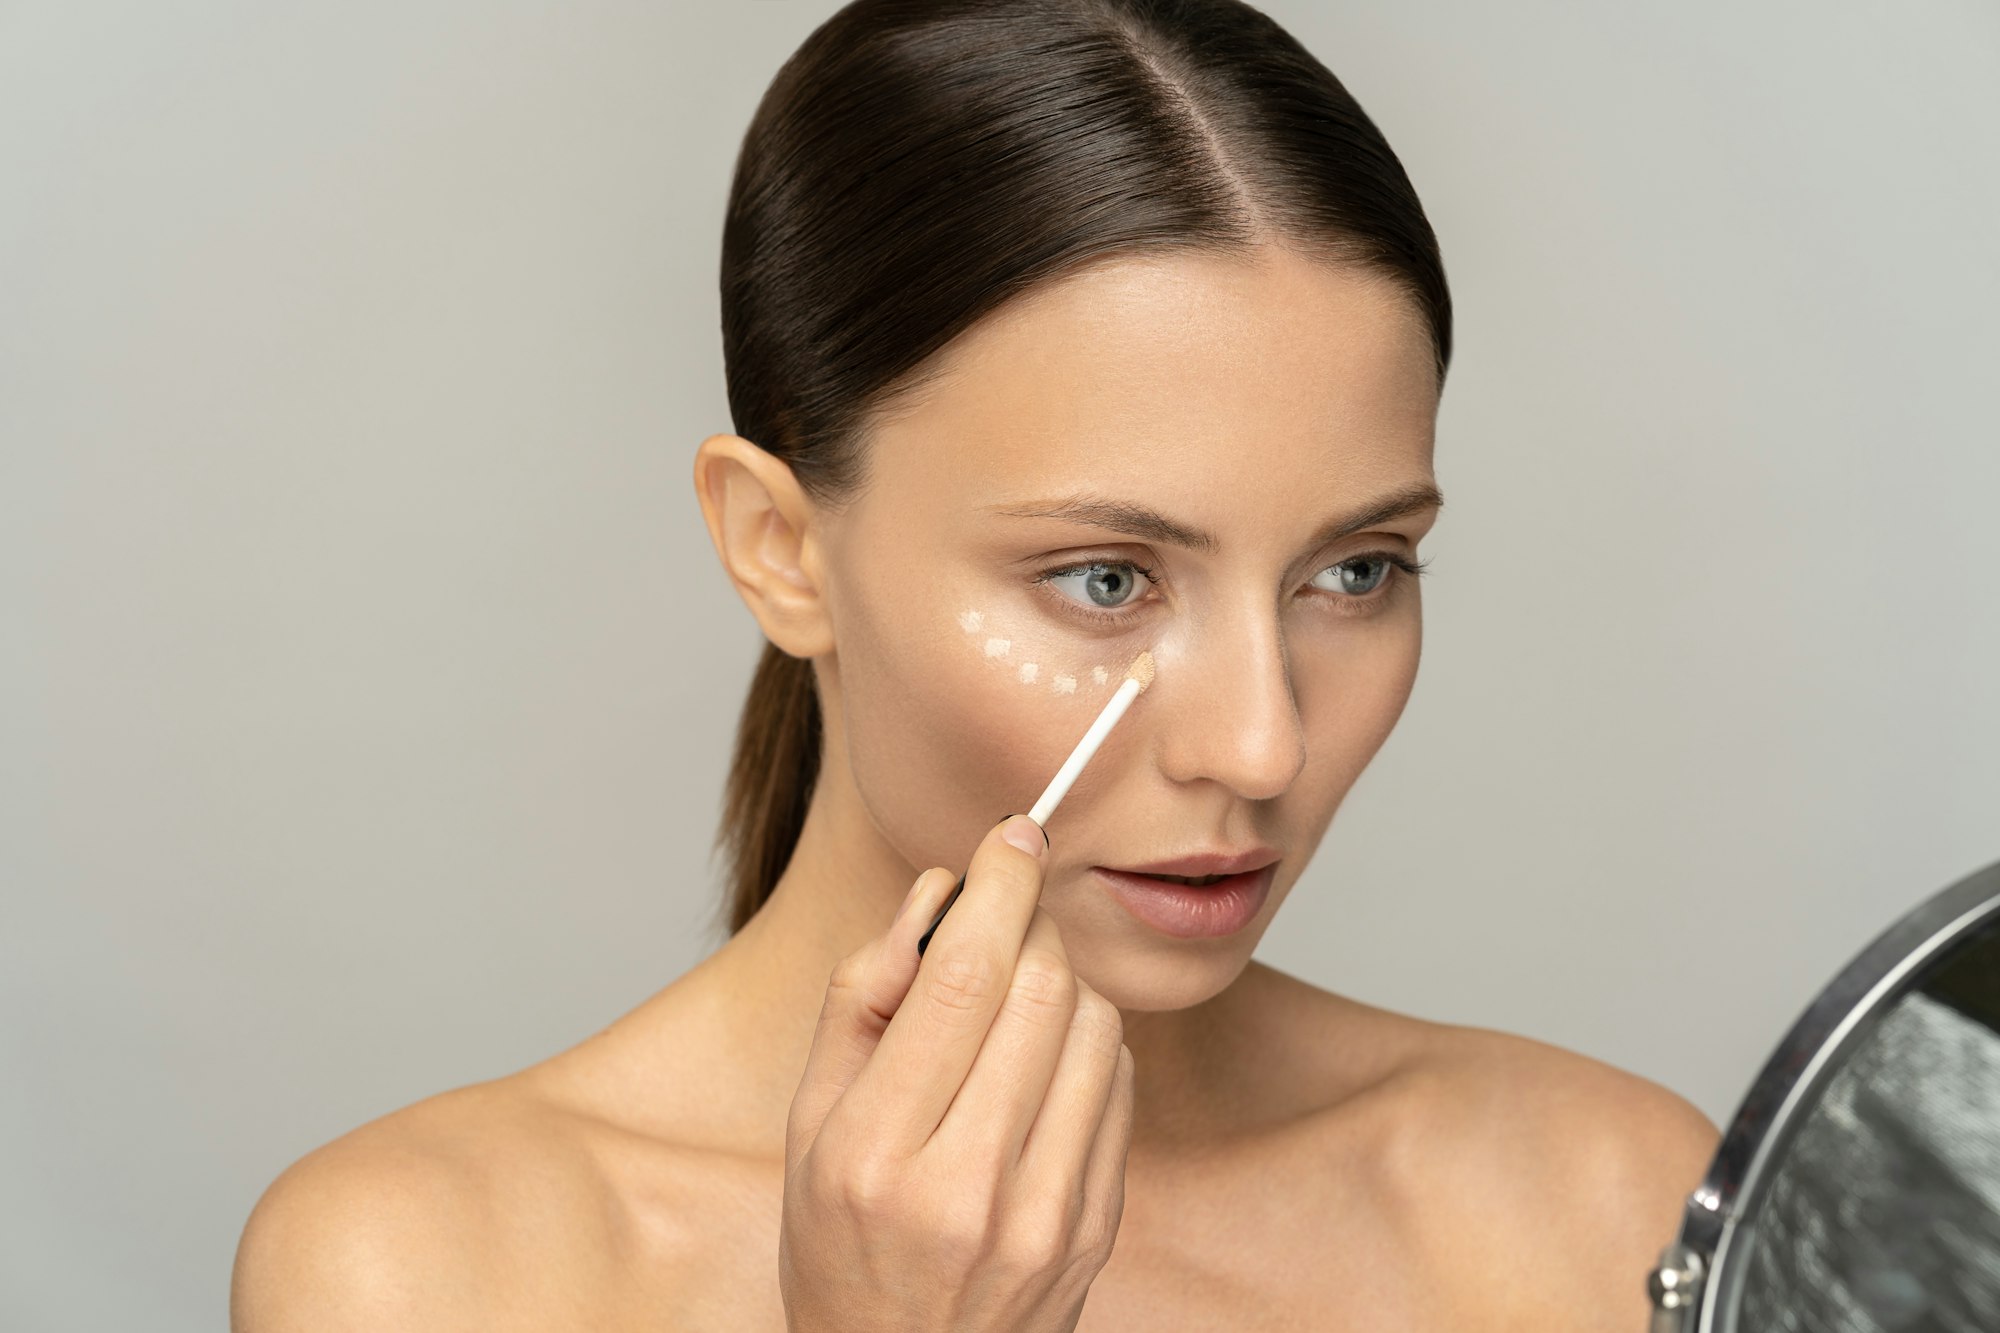 Woman with natural makeup applying concealer on flawless fresh skin, doing make up looking at mirror